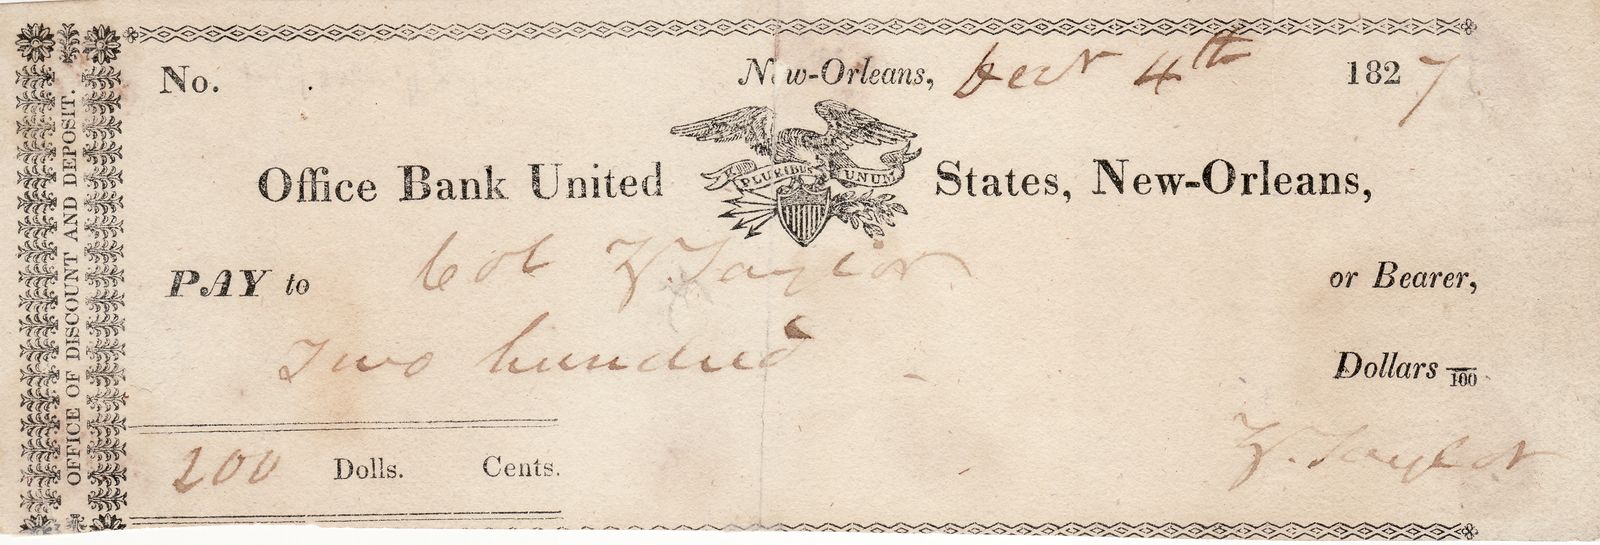 Excessively Rare Presidential Check Signed by Zachary Taylor